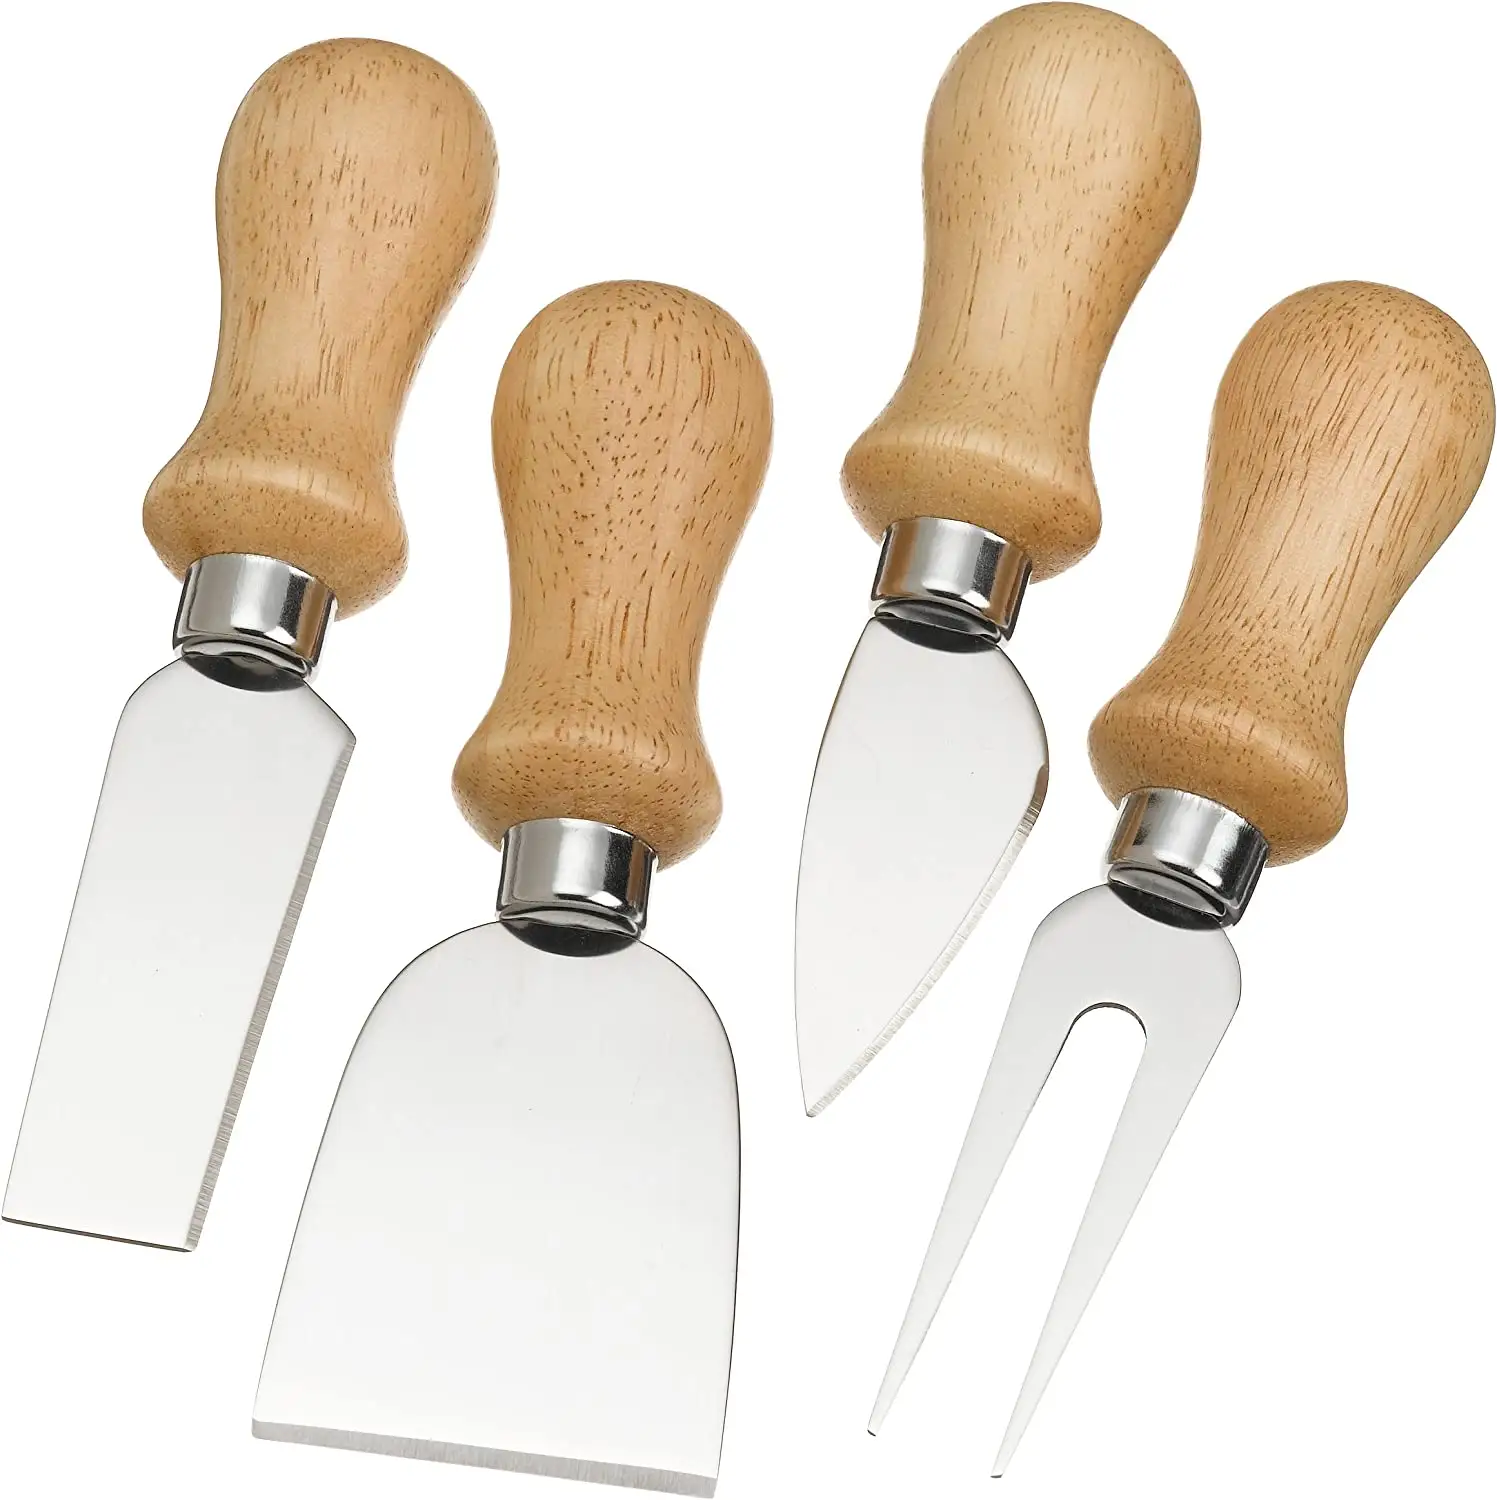 4pcs Unique Cheese Knife Tool Set Wood Bamboo Handle Stainless Steel Cheese Knife Set for Cheese Pizza kitchen gadgets